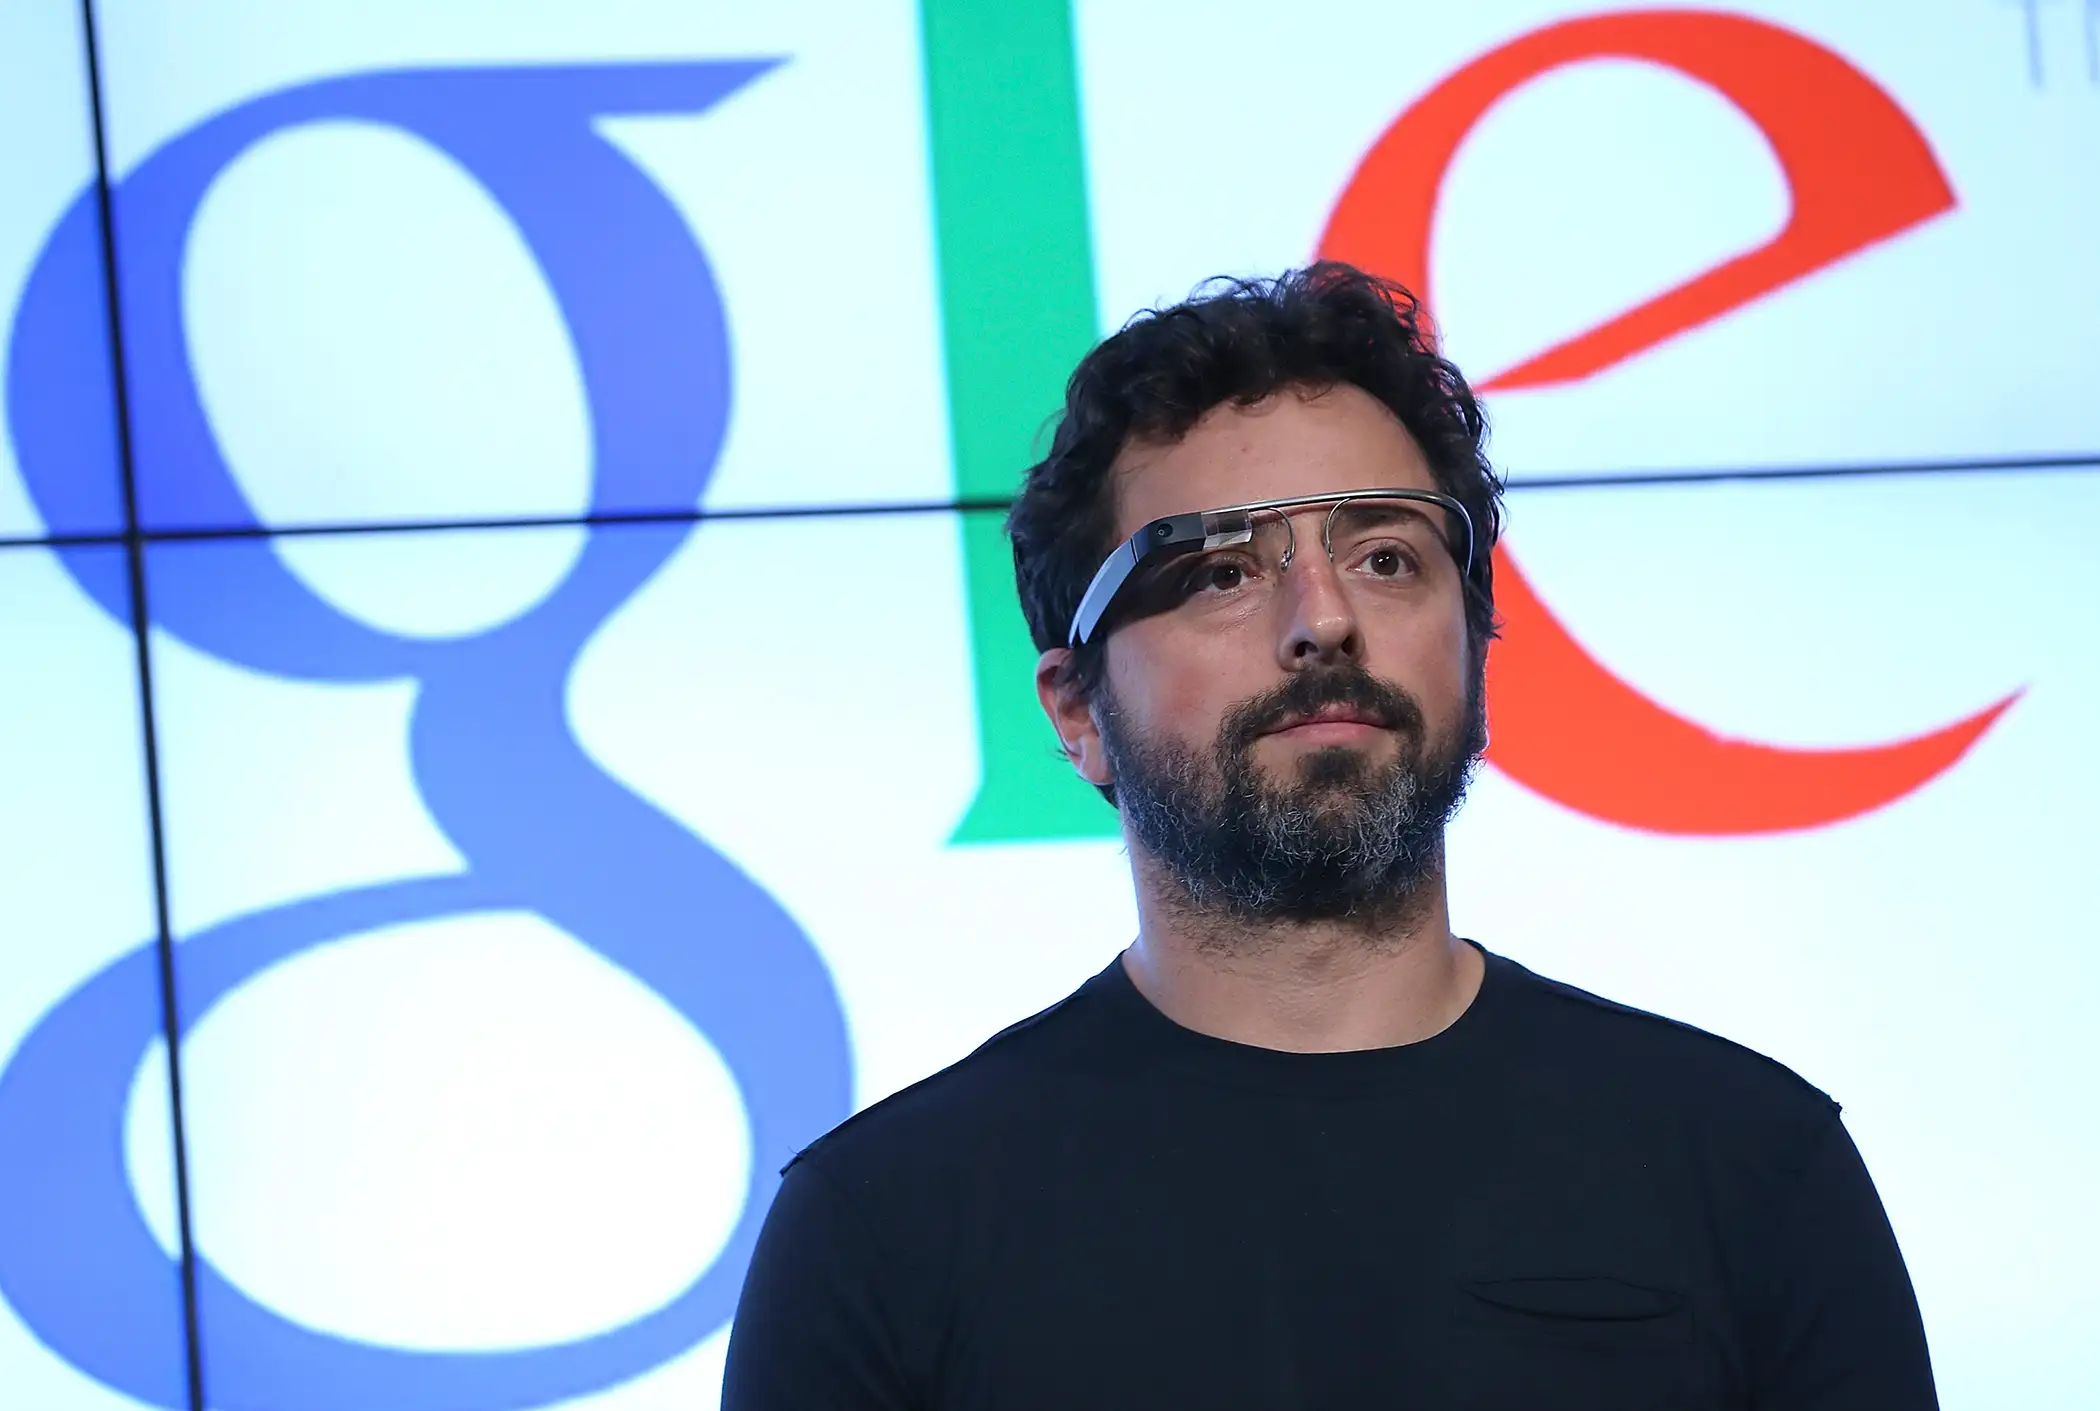 Google co-founder Sergey Brin looks on during a news conference at Google headquarters on September 25, 2012 in Mountain View, California.